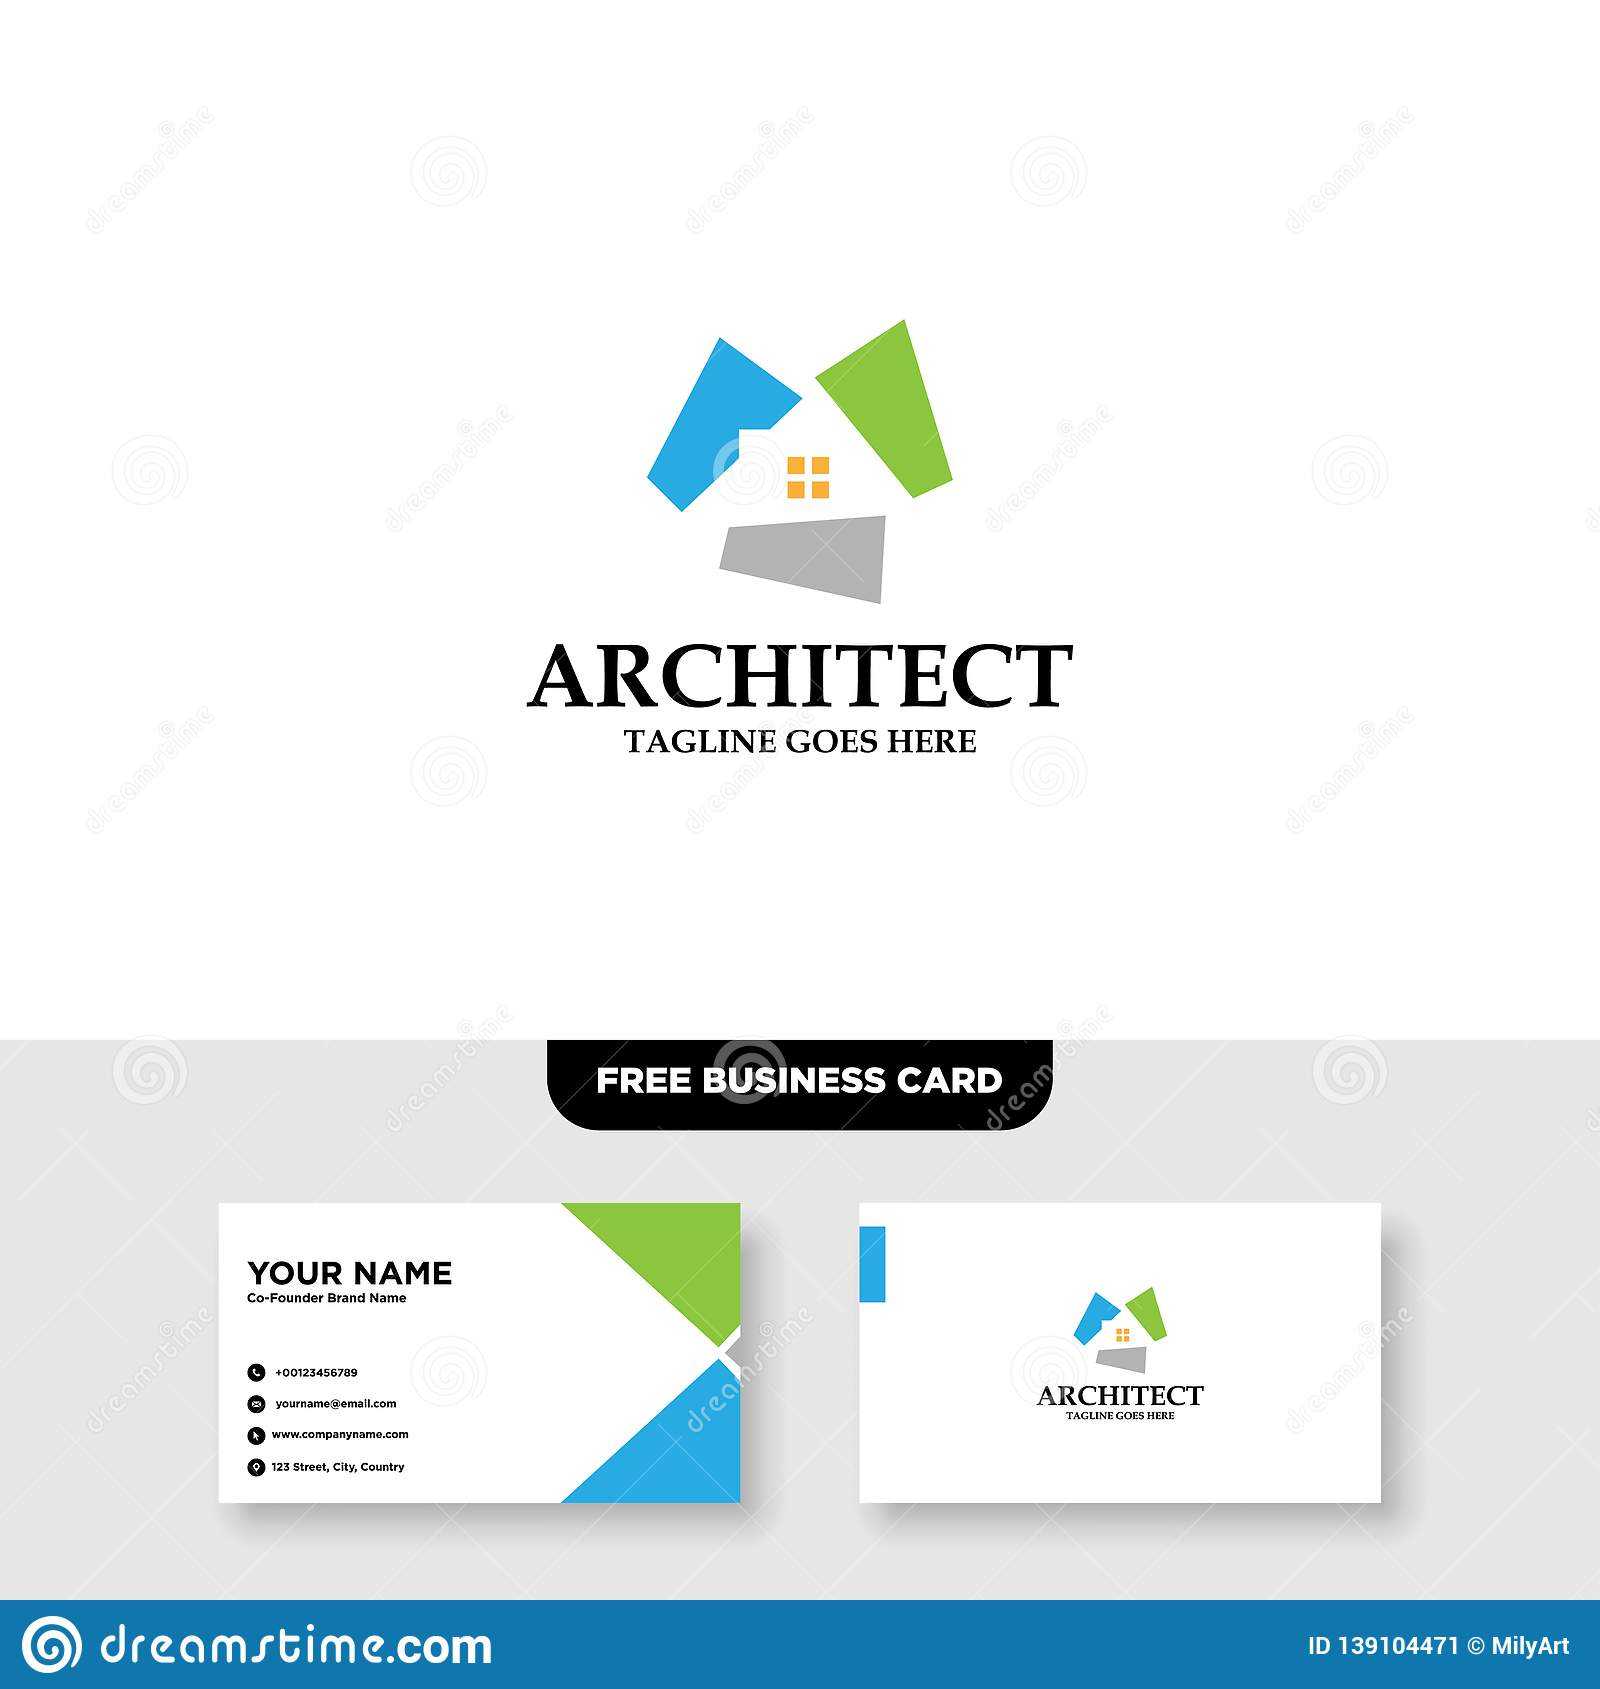 Architecture Company, Construction, Architect, Vector Logo Within Ibm Business Card Template